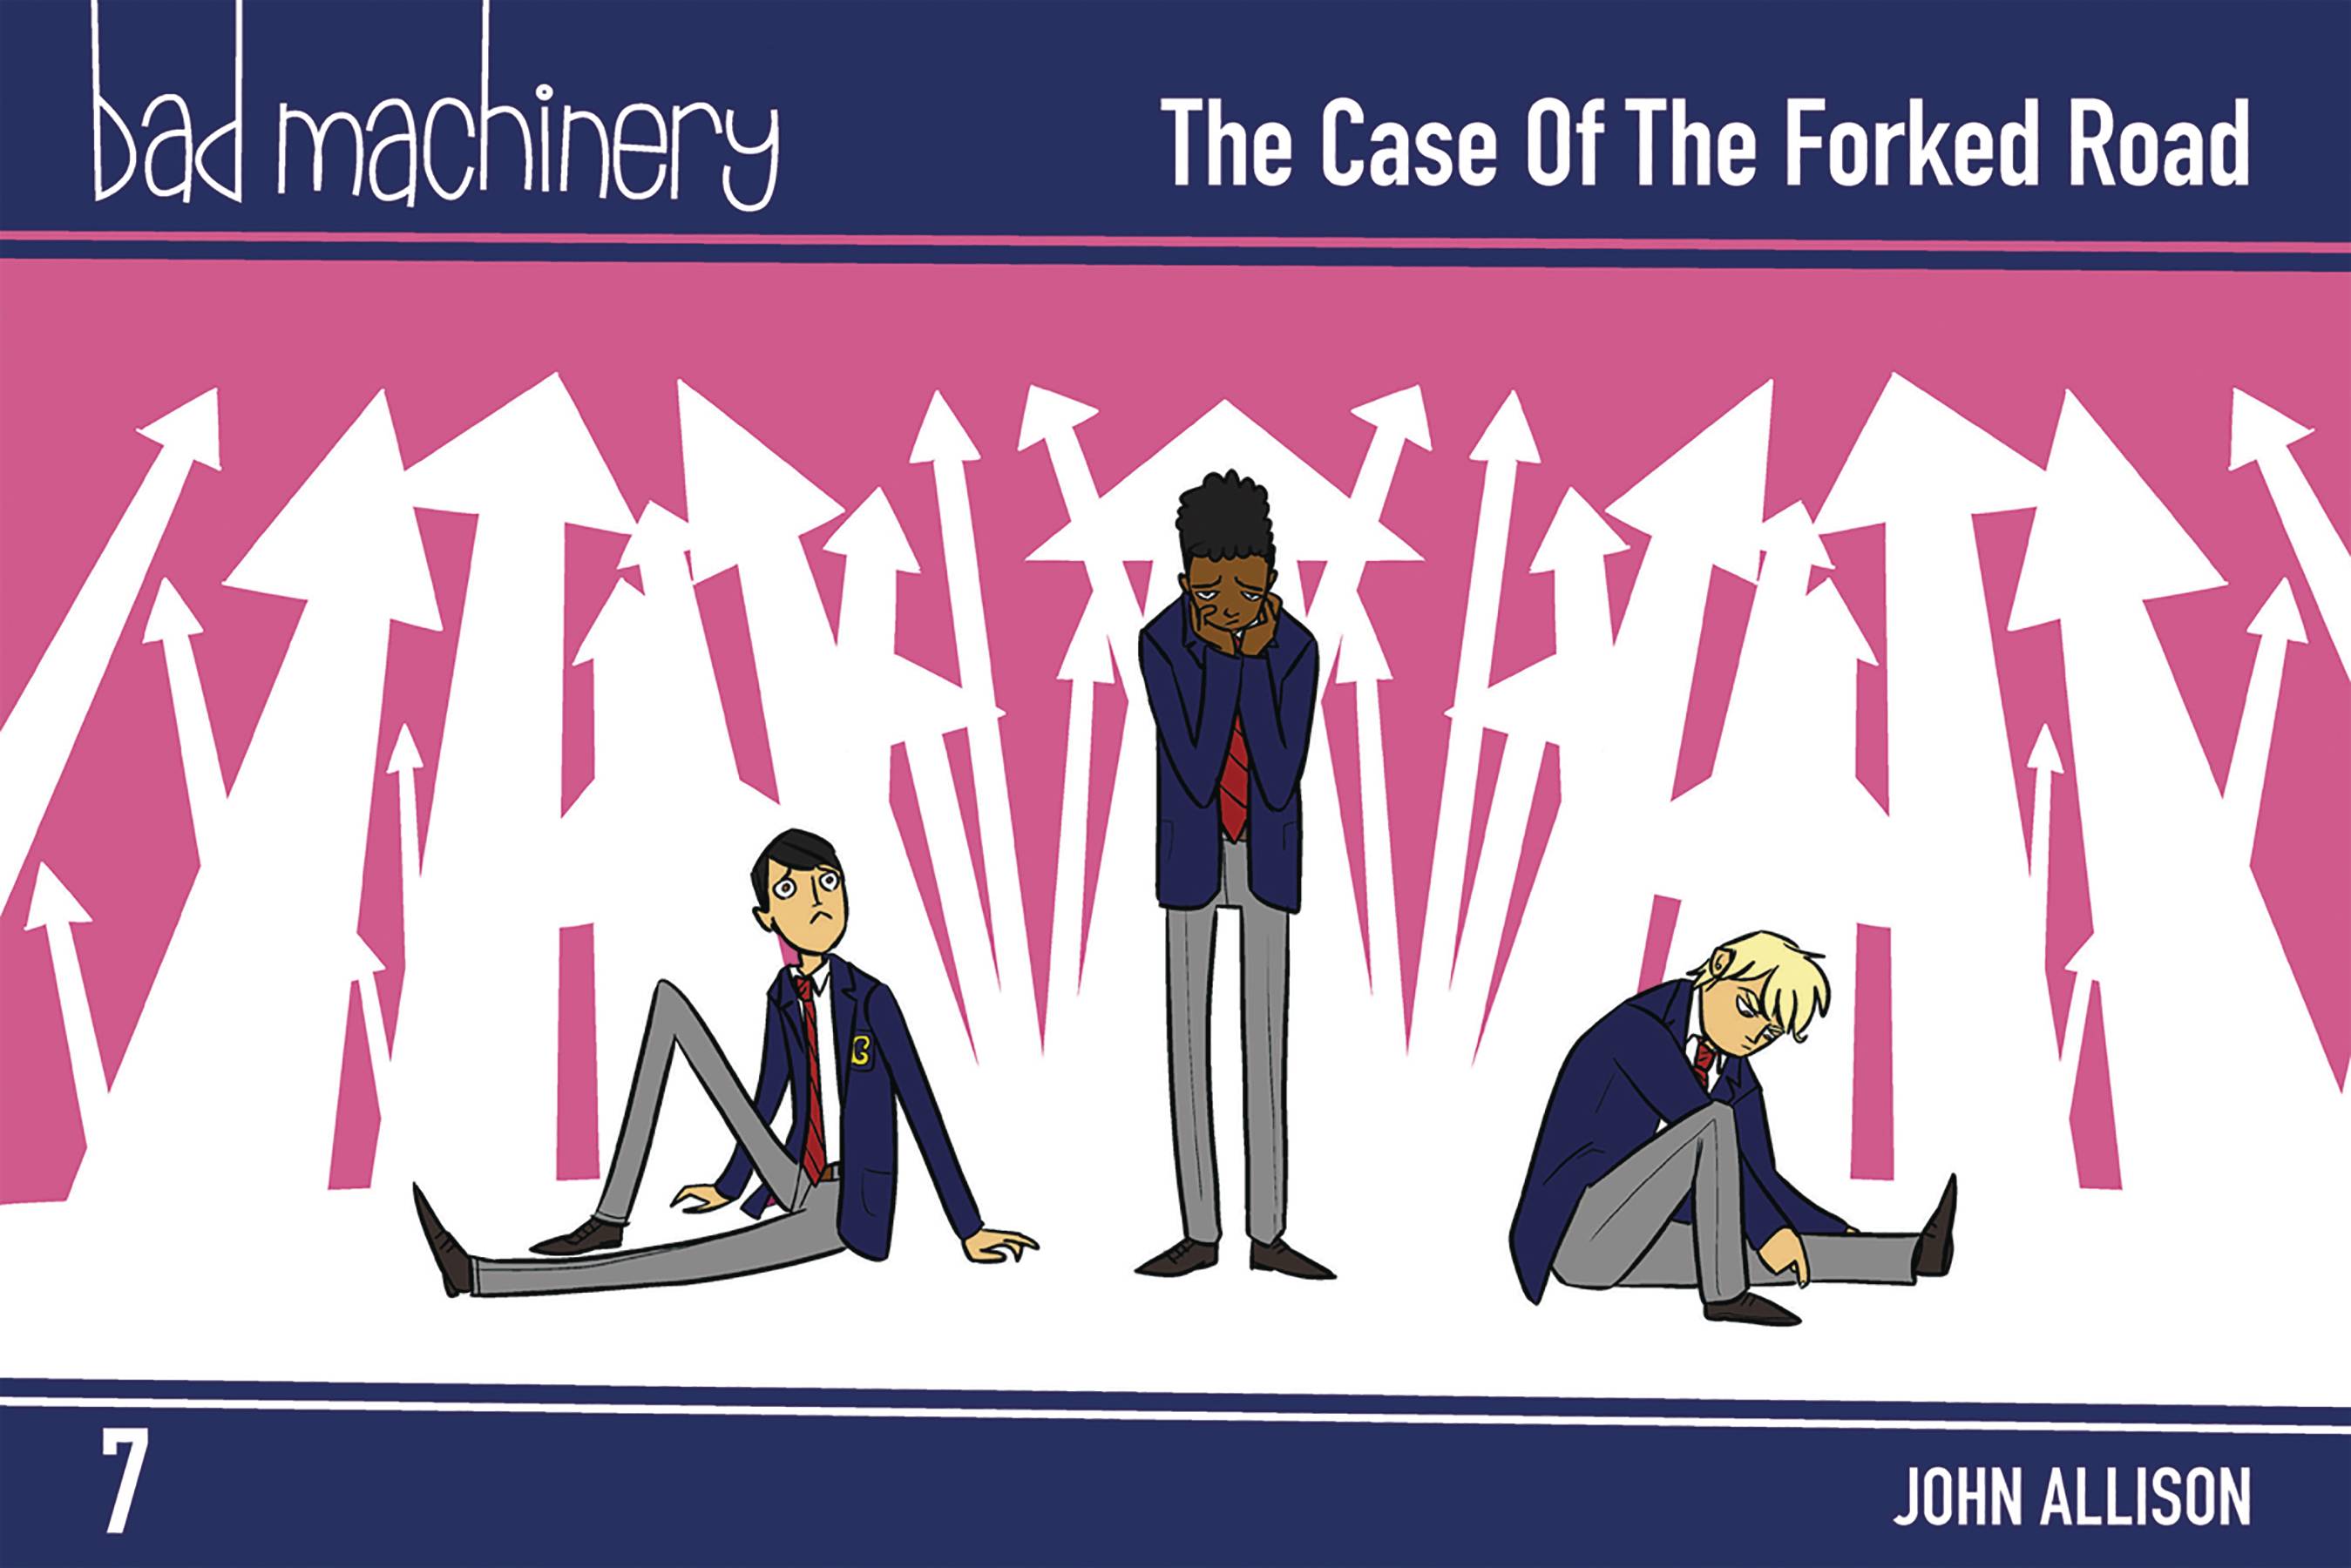 Bad Machinery vol 7: The Case Of The Forked Road